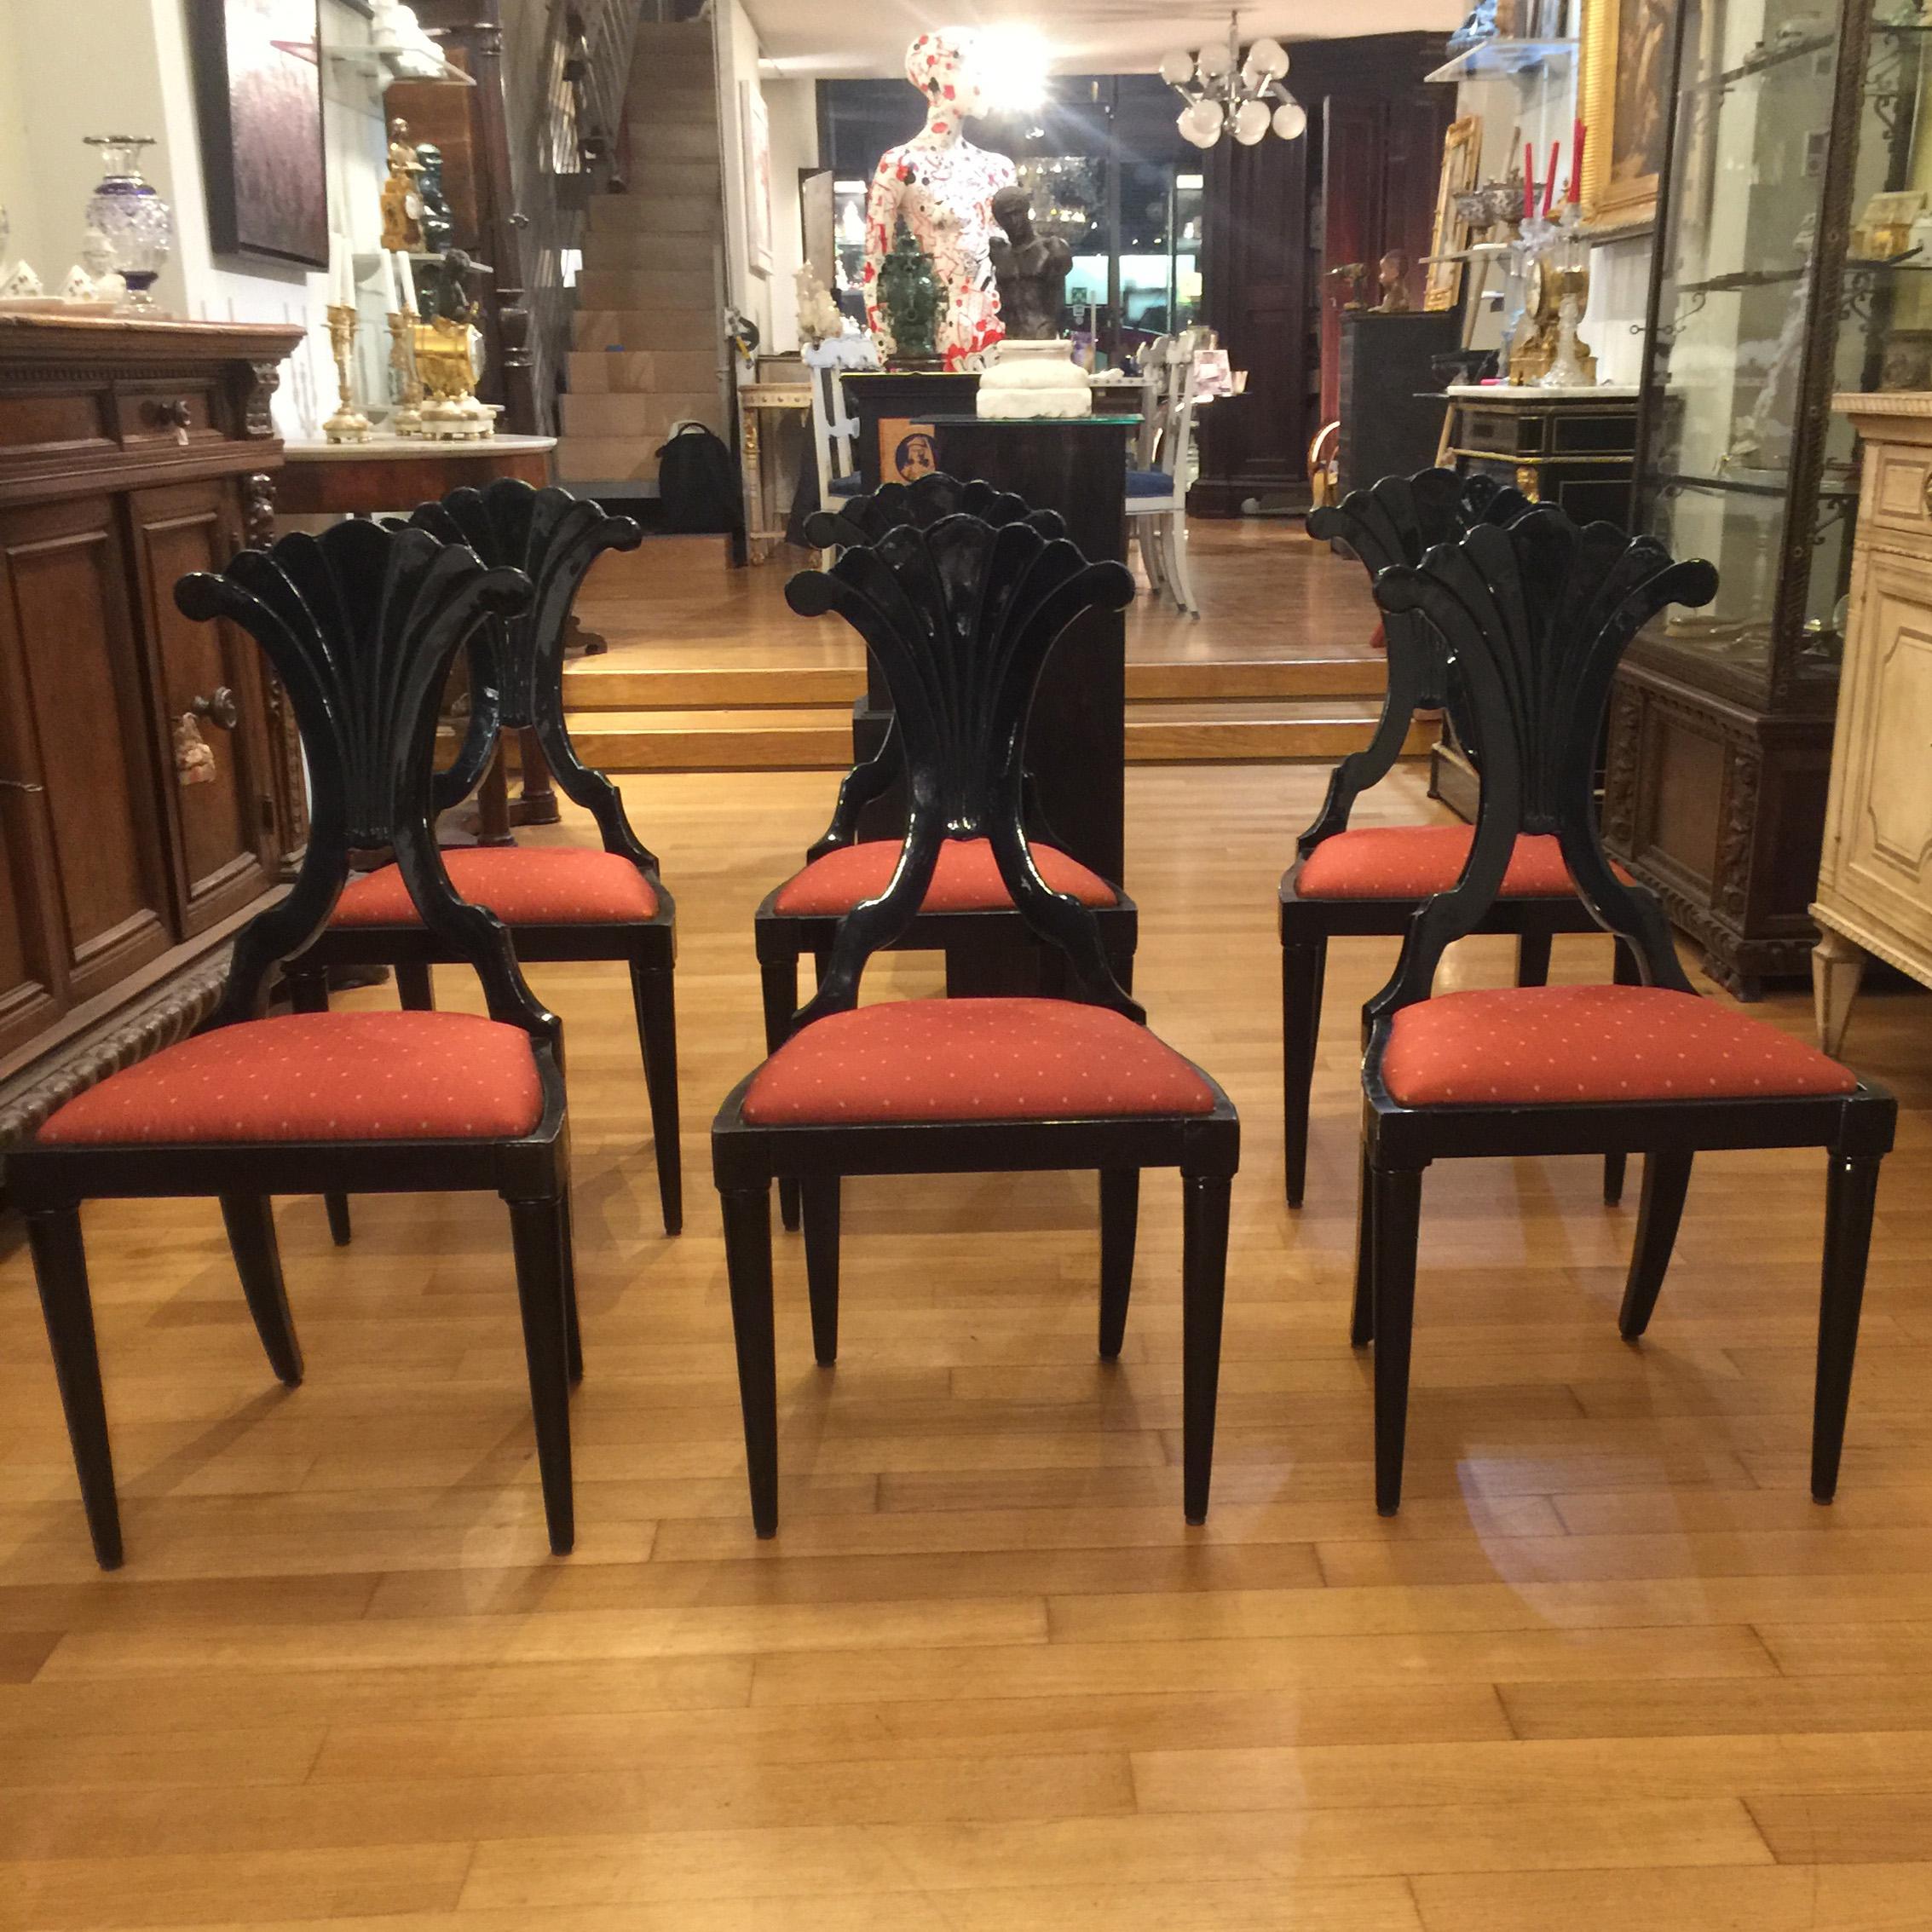 An elegant set of six Italian Bidermeier style chairs in solid black wood. The chairs present a beautiful Silhouette with elegant lines, a loop with ormolu detail underneath the curved back and straight legs.